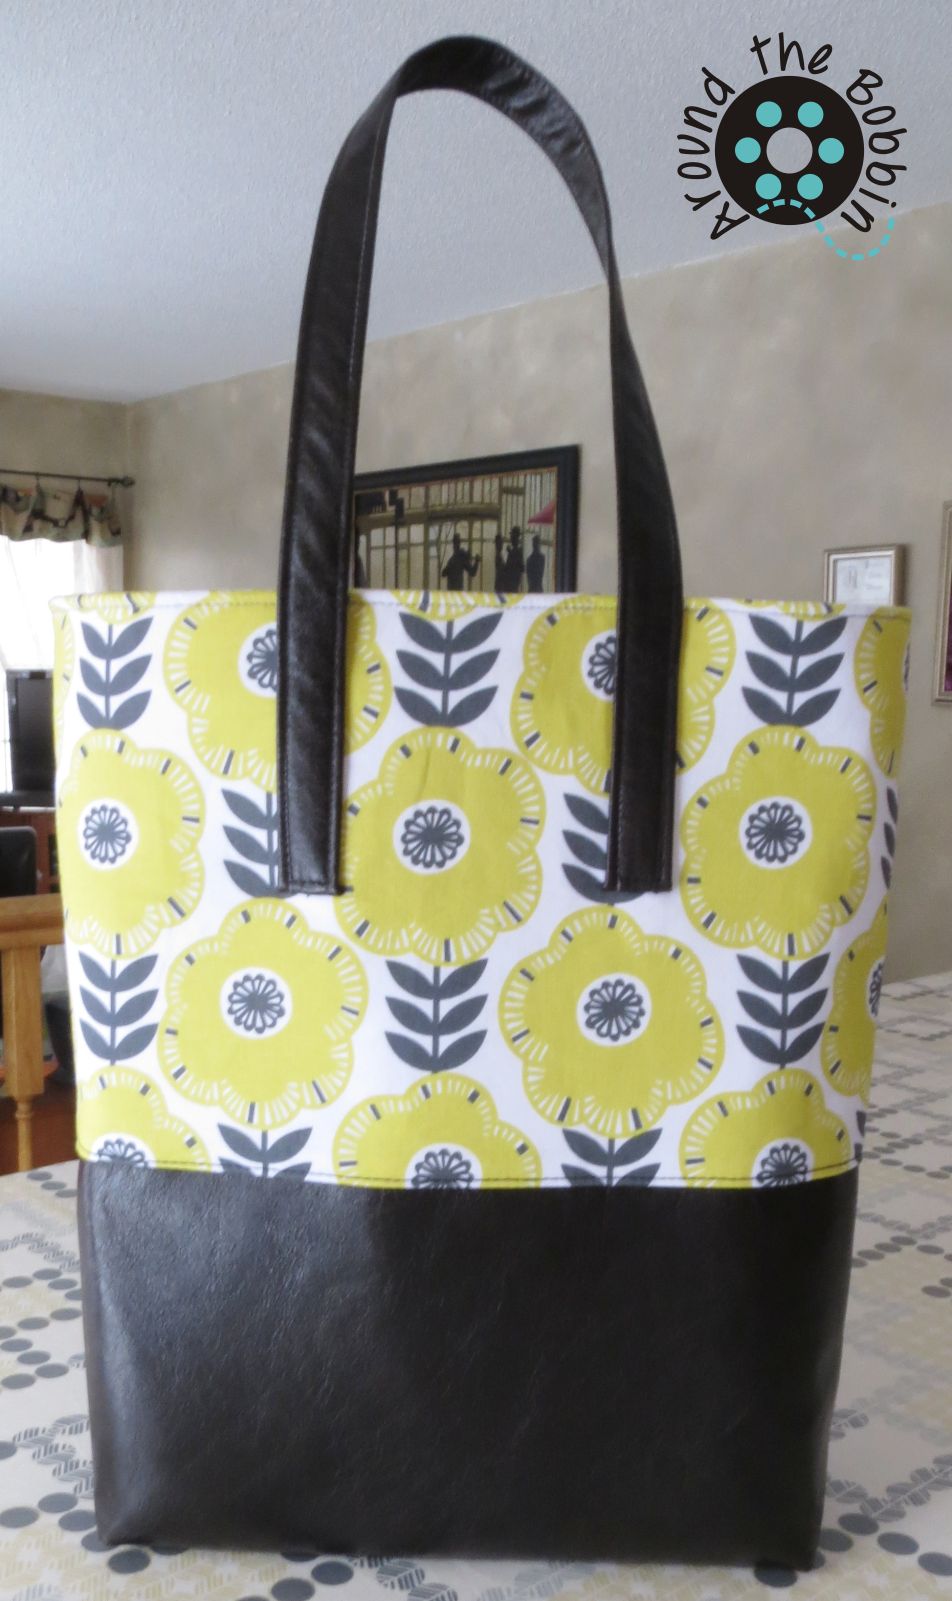 Introducing the 21 Totes Project – Tote #1